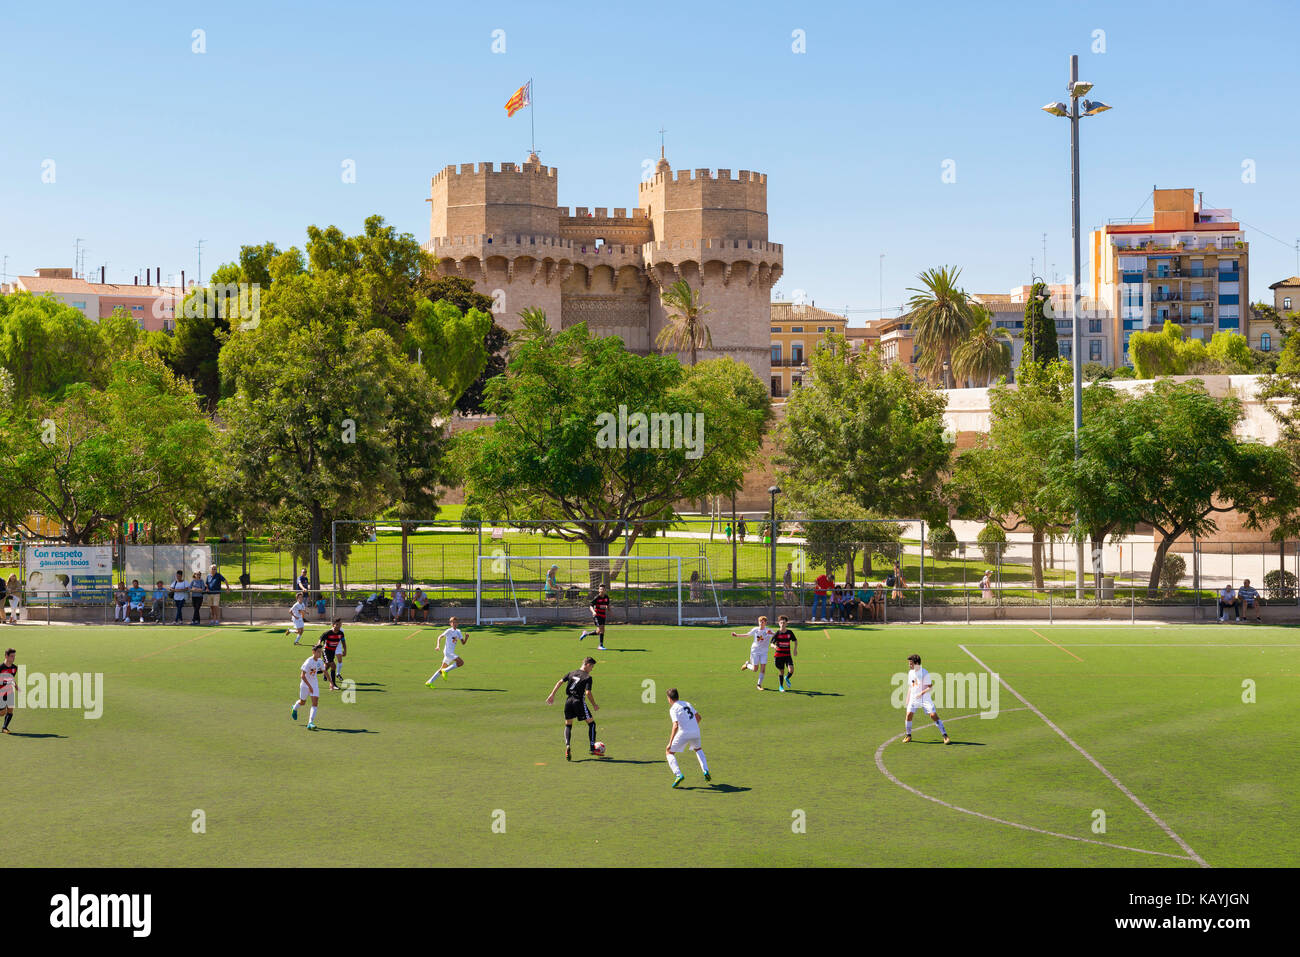 Valencia Rio Turia garden, overlooked by the Torres Serranos city gate, teenagers play a football match on a pitch in the Turia riverbed garden, Spain Stock Photo